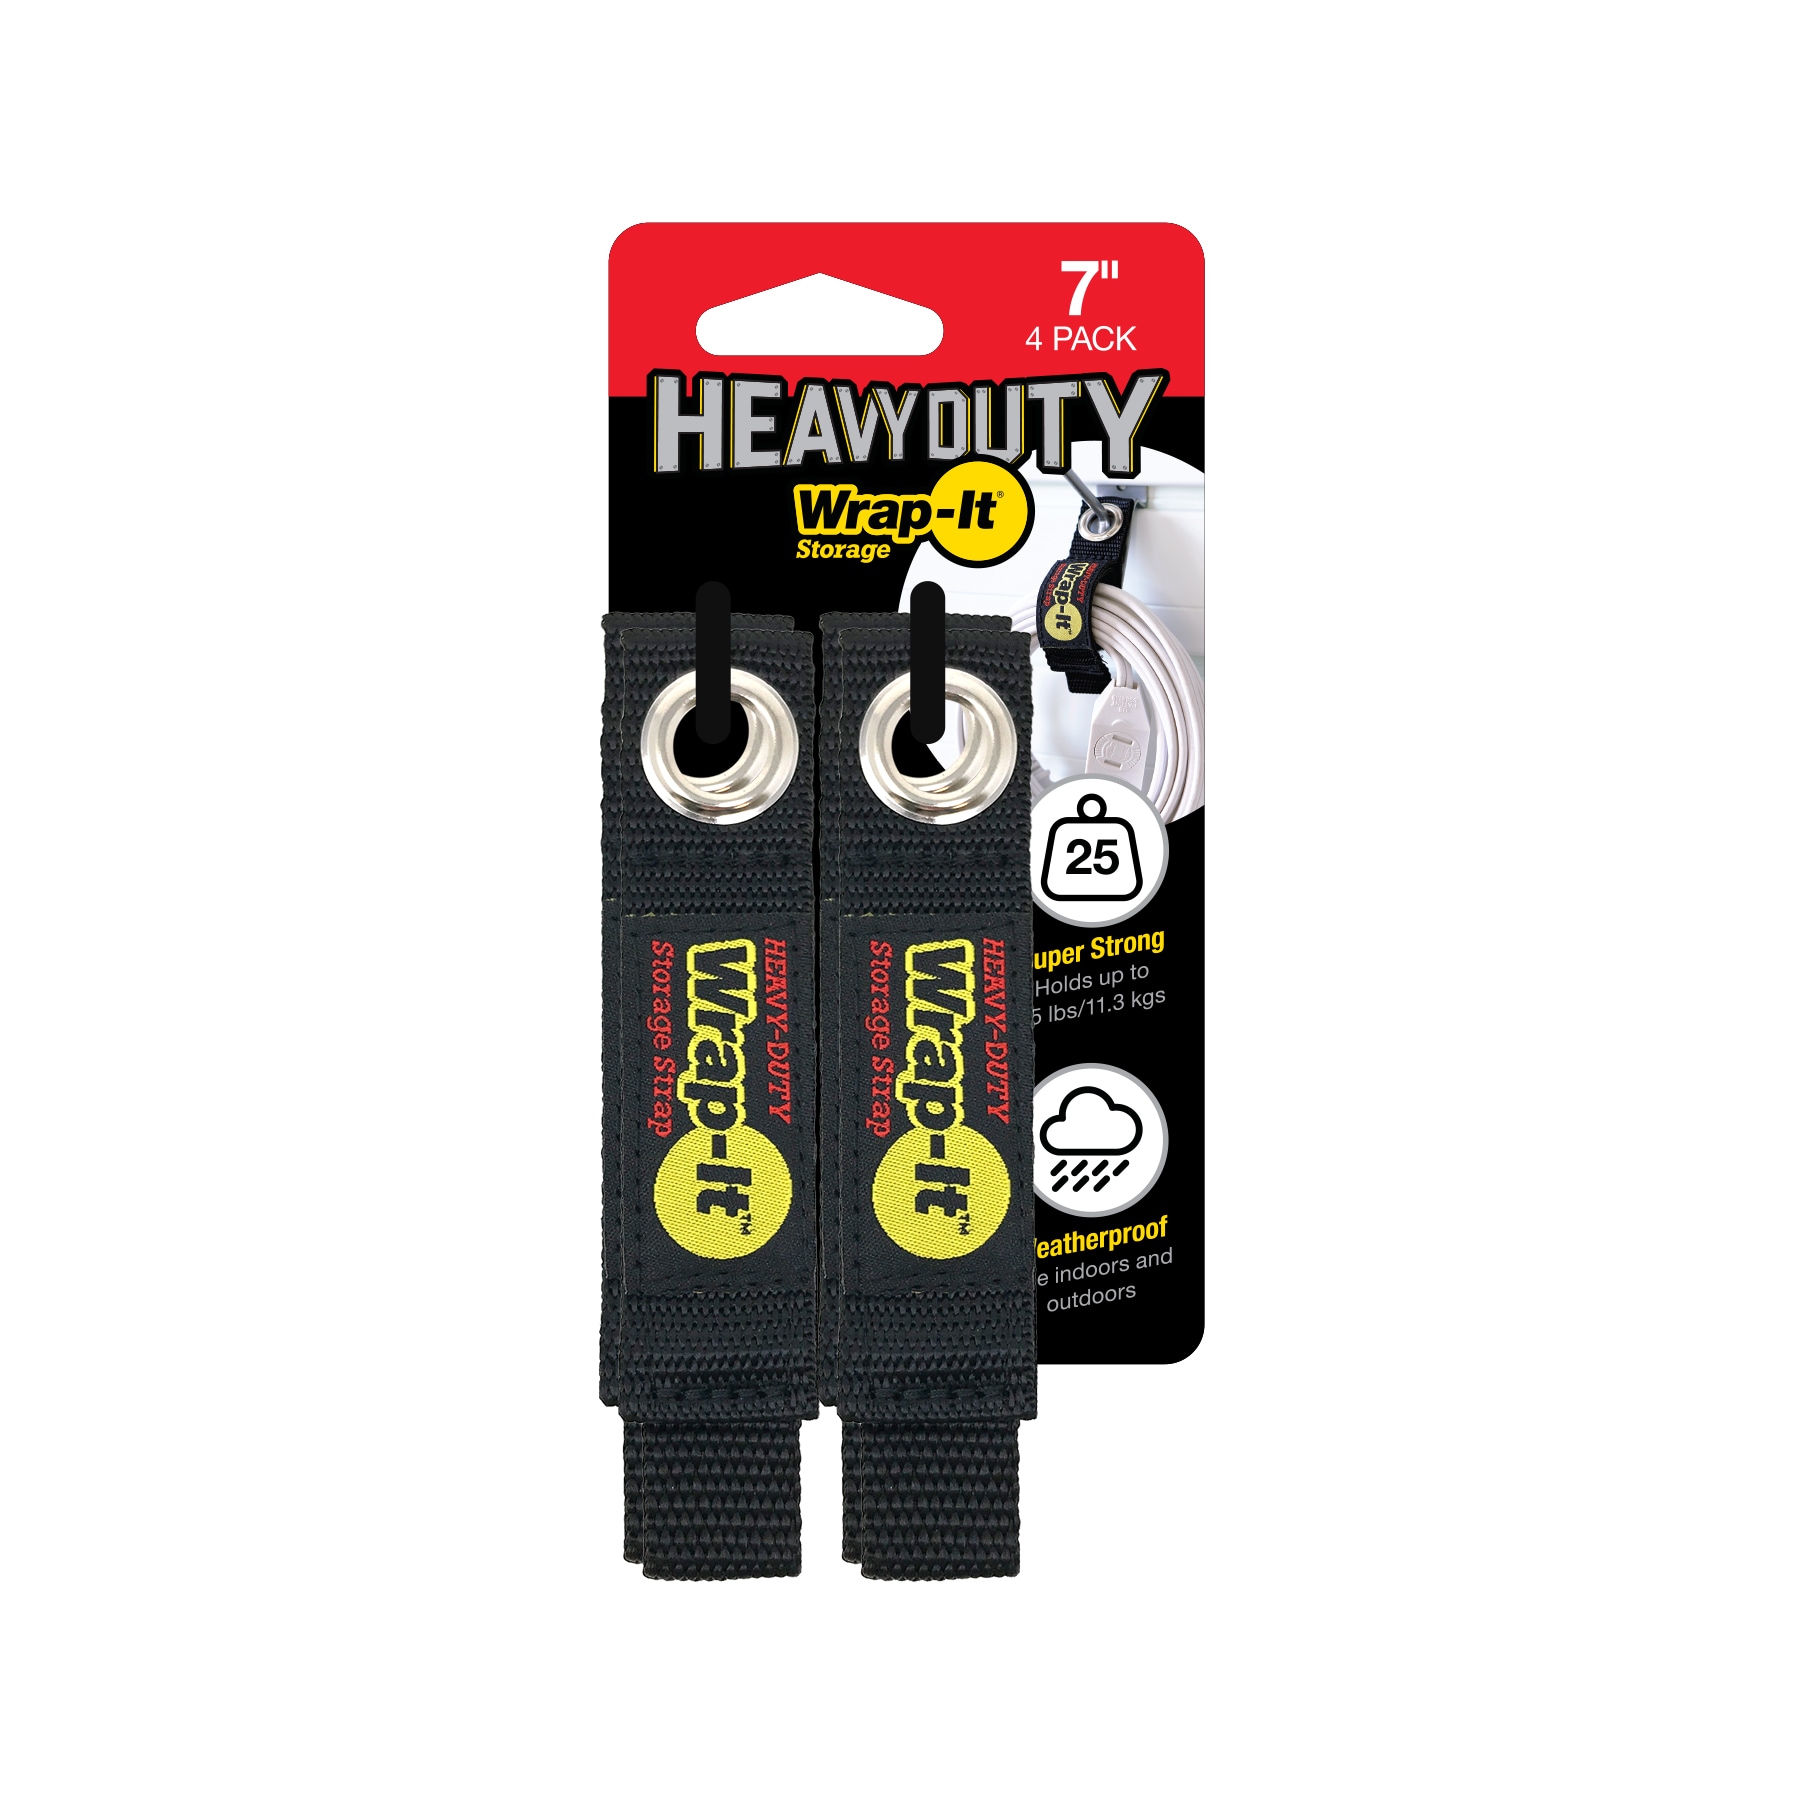 Wrap-It Quick-Strap 9-in Red Hook and Loop Fastener (4-Pack) in the  Specialty Fasteners & Fastener Kits department at